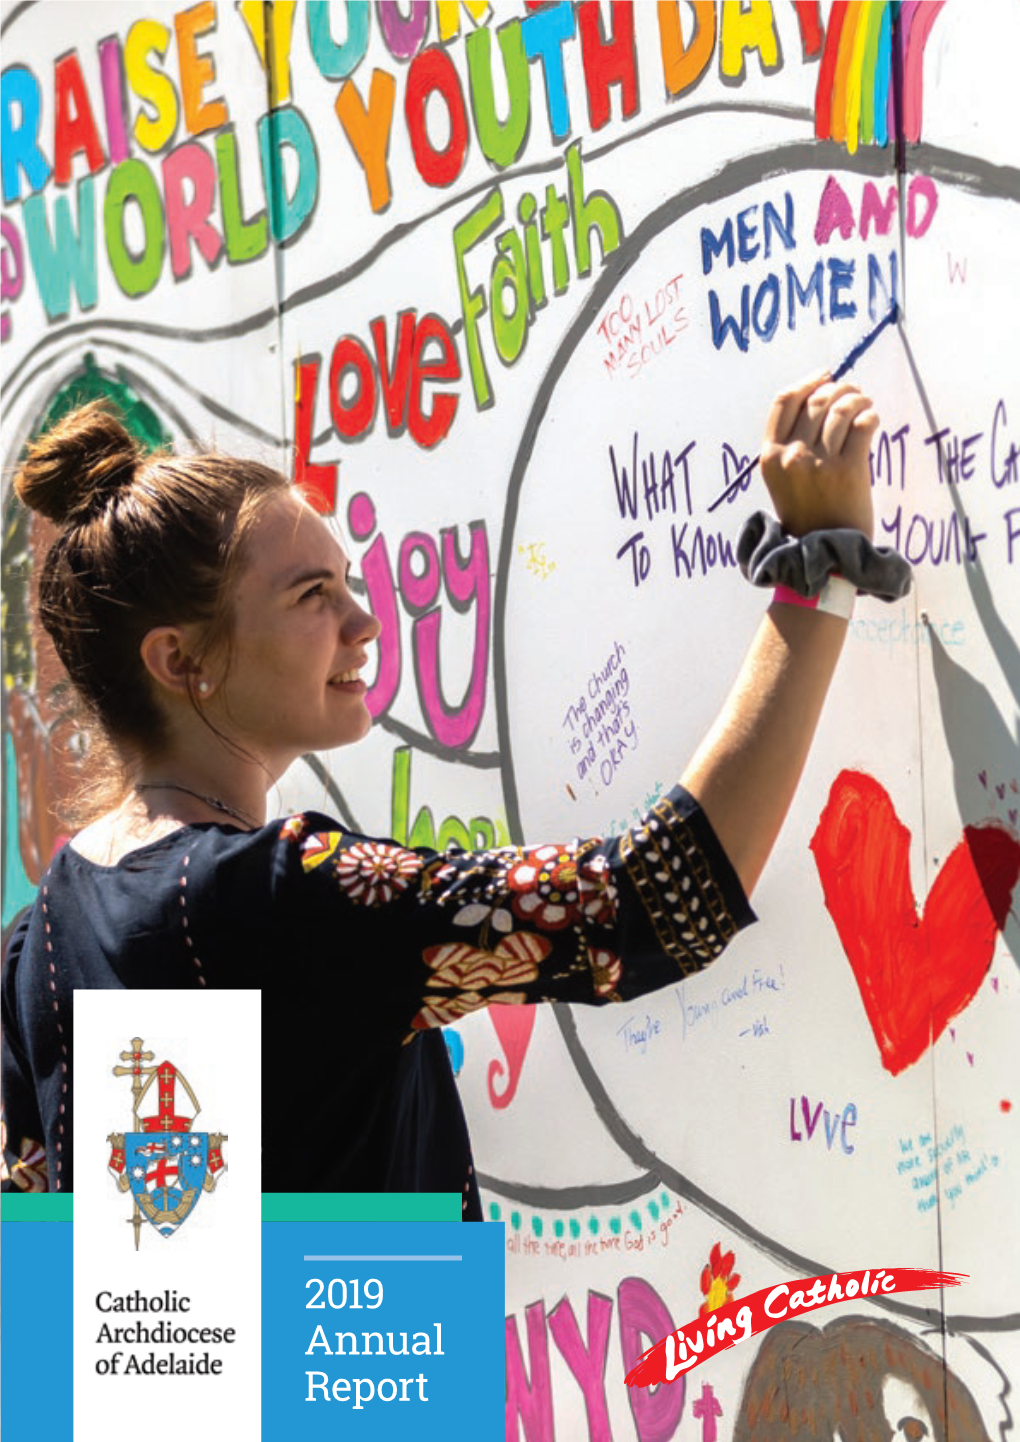 2019 Annual Report COVER IMAGE: WORLD YOUTH DAY LOCAL CELEBRATION at SACRED HEART COLLEGE PHOTOGRAPHER: BEN MACMAHON 2019 Annual Report